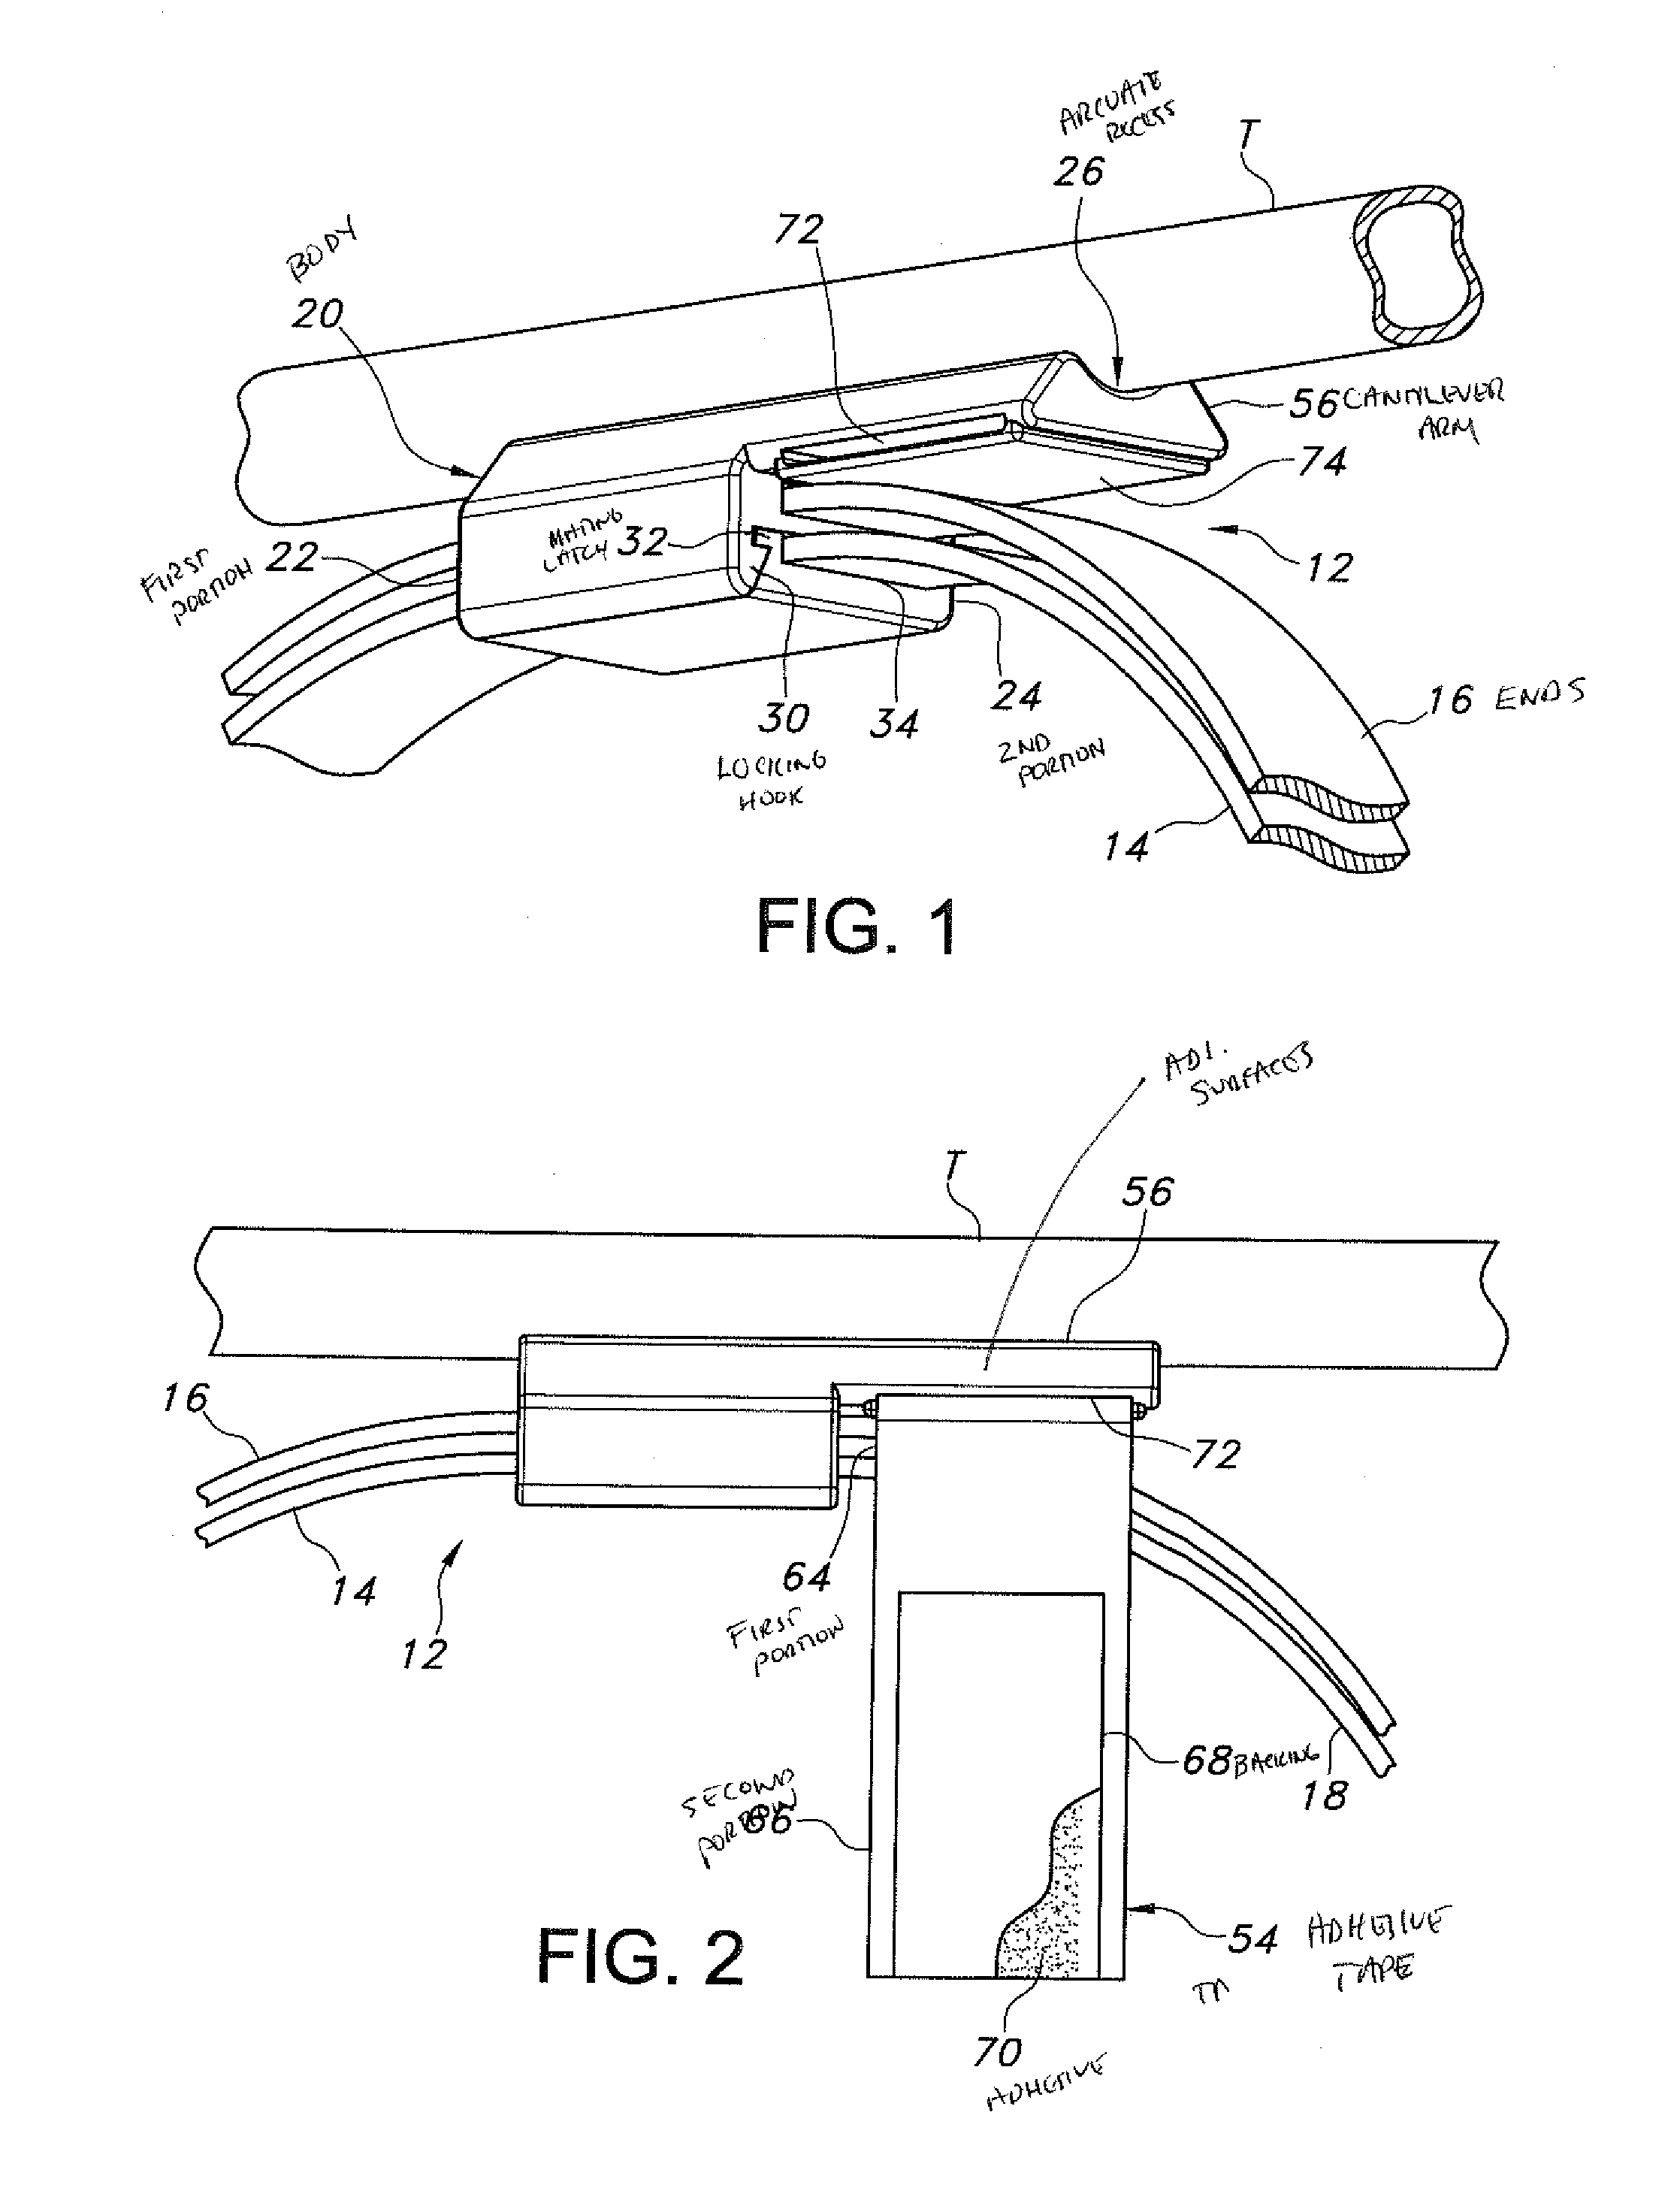 Bridle system for placing and securing a nasal tube in a patient